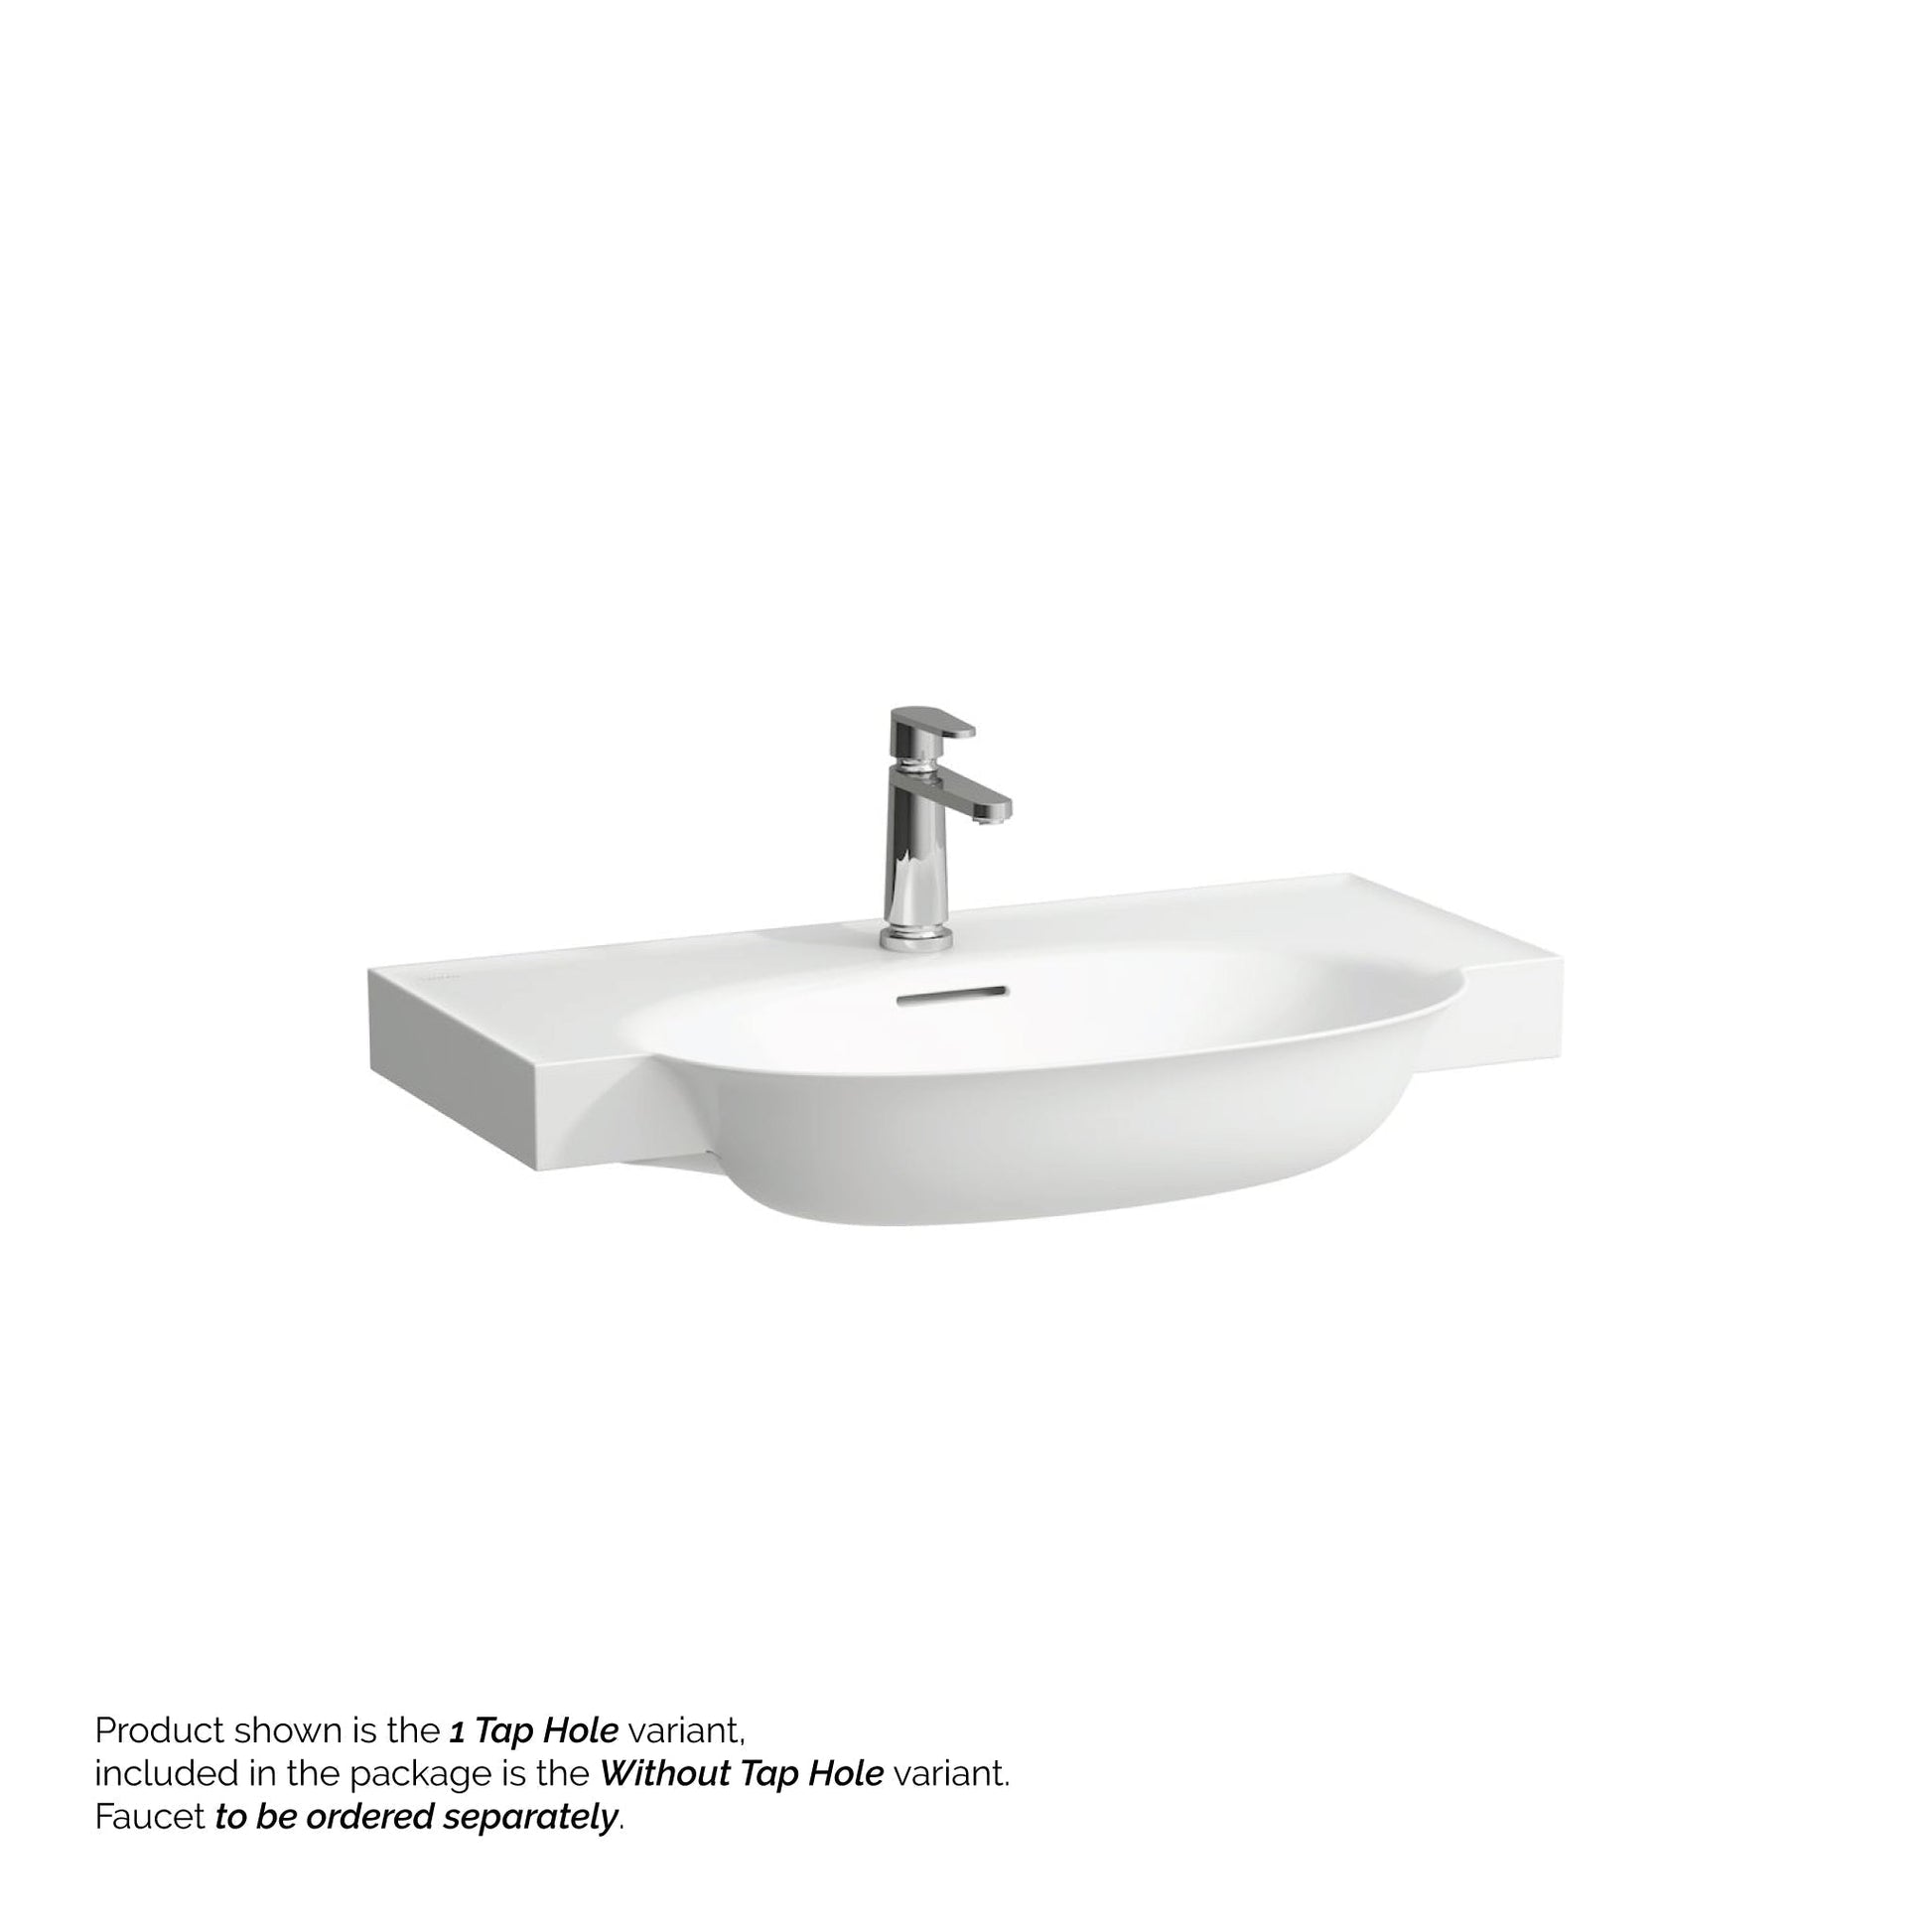 Laufen New Classic 32" x 19" Matte White Ceramic Wall-Mounted Bathroom Sink Without Faucet Hole